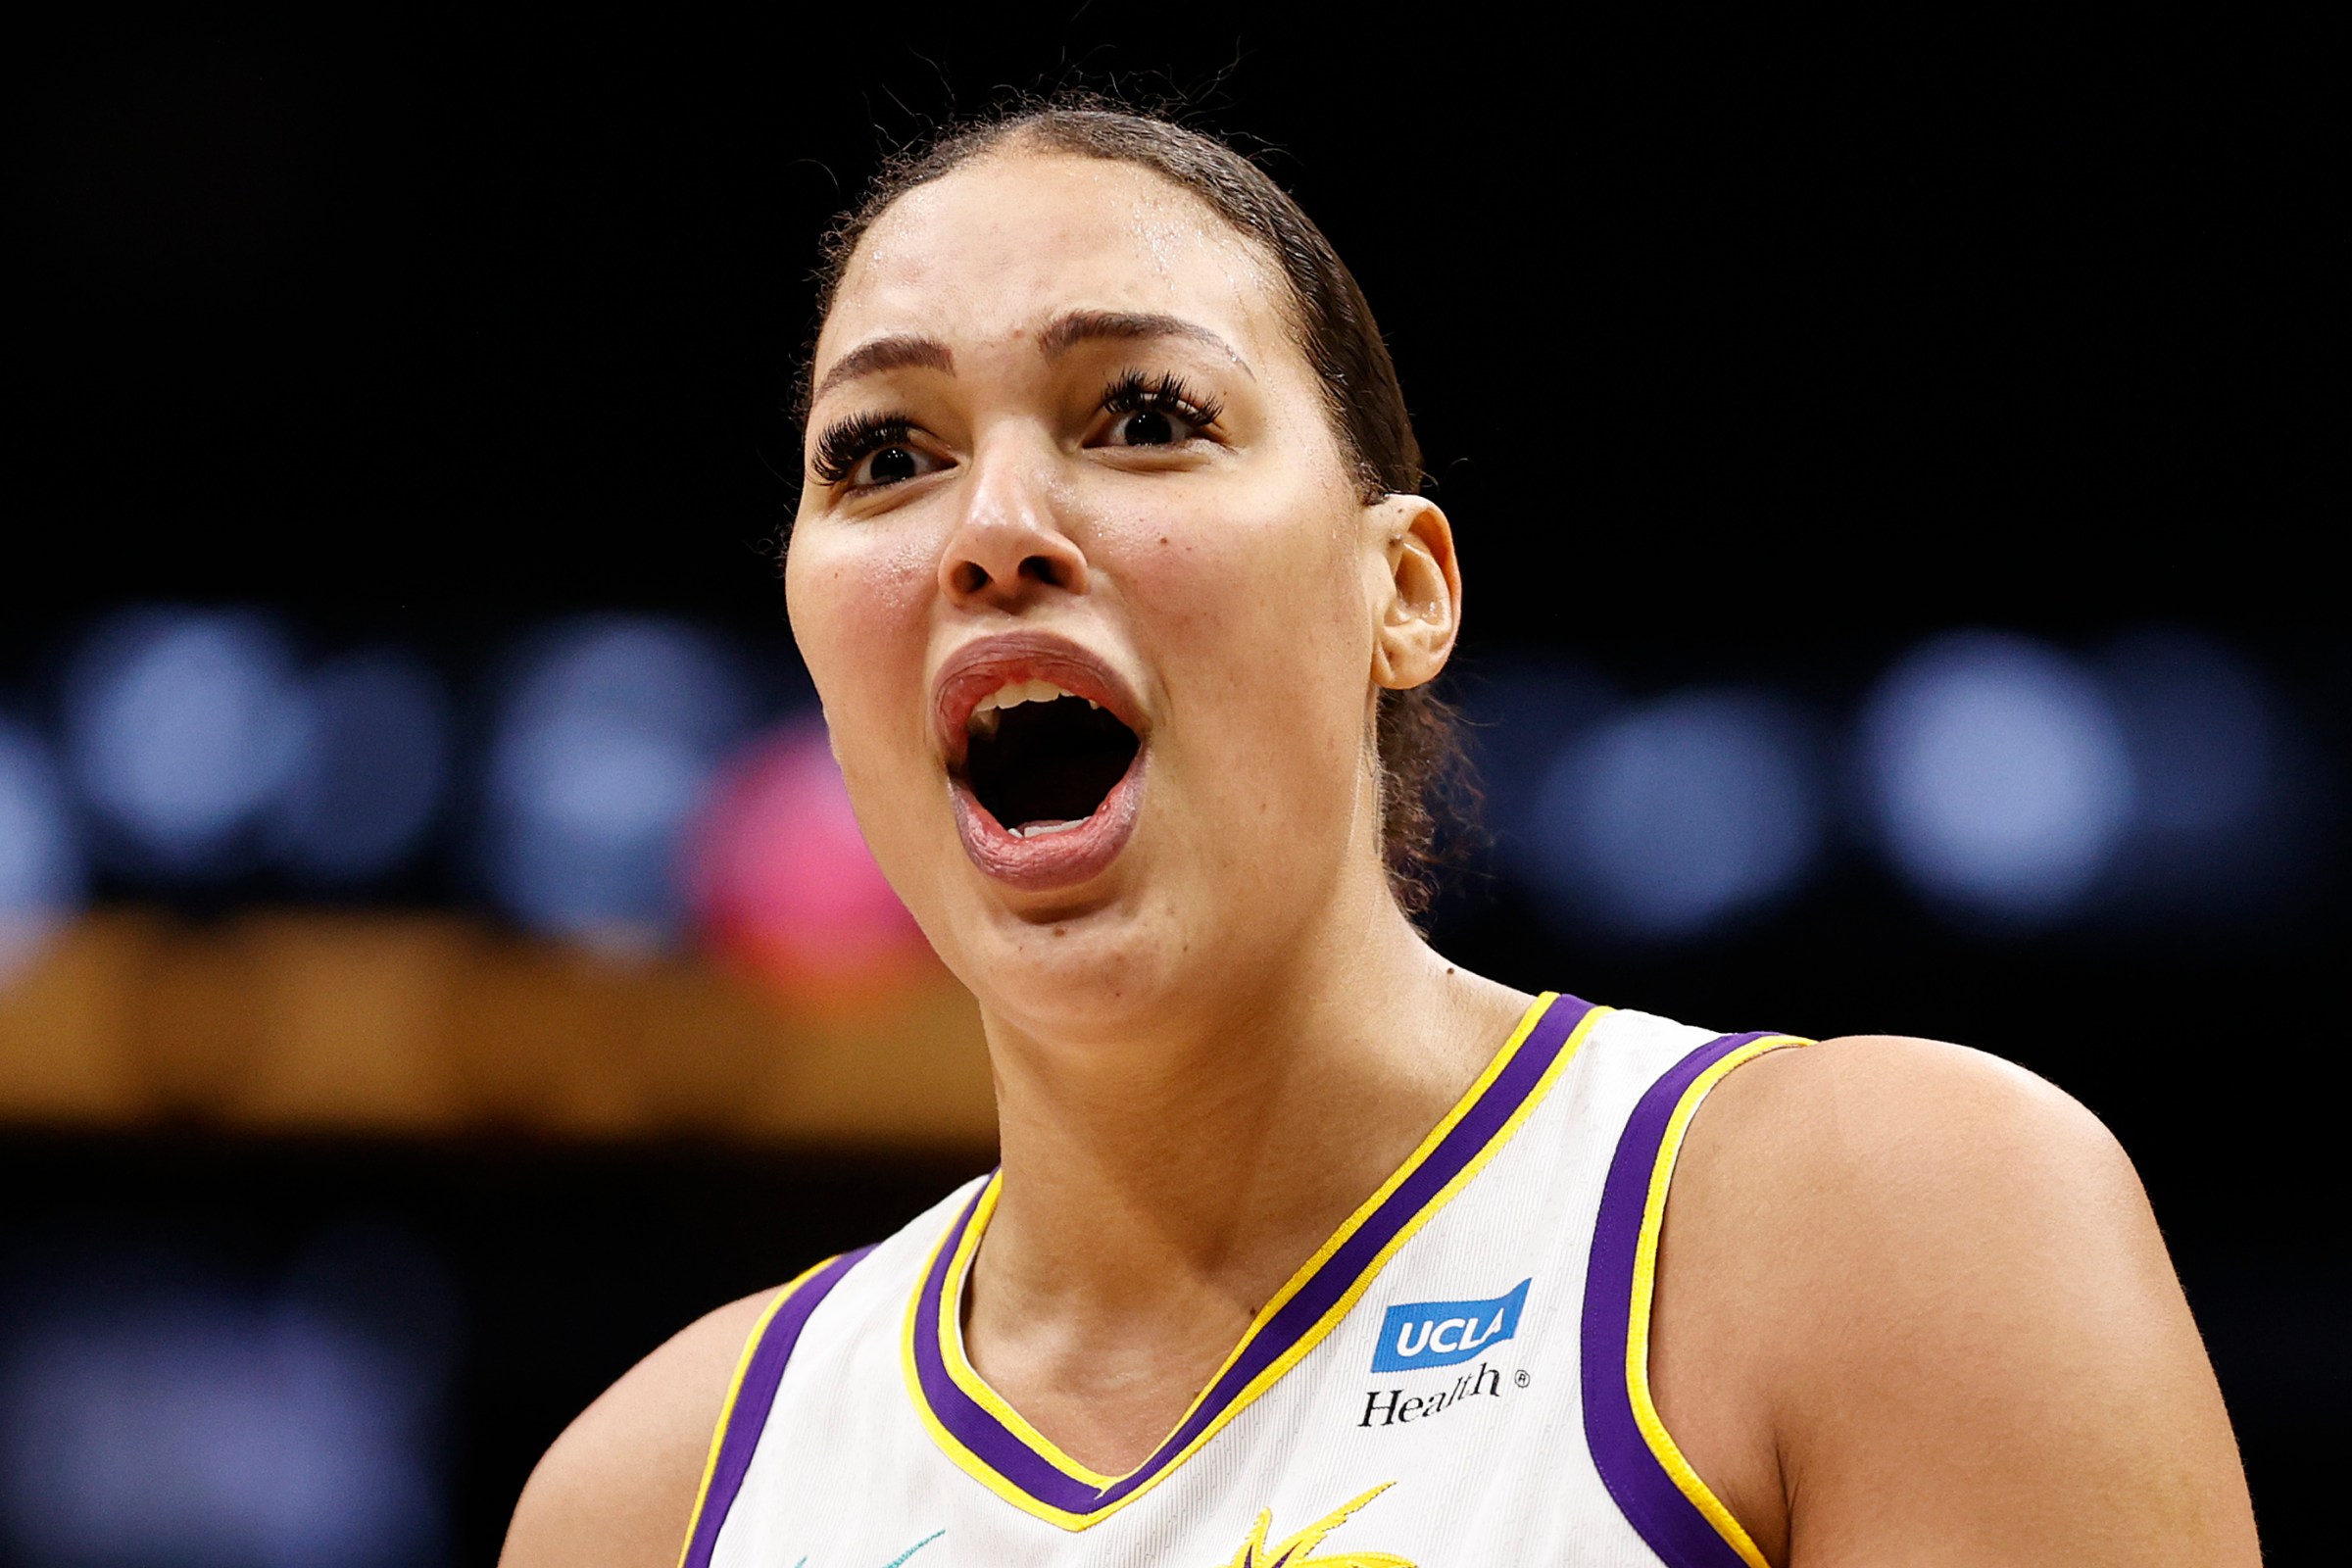 SEATTLE, WASHINGTON - MAY 20: Liz Cambage #1 of the Los Angeles Sparks reacts against the Seattle Storm during the first half at Climate Pledge Arena on May 20, 2022 in Seattle, Washington.